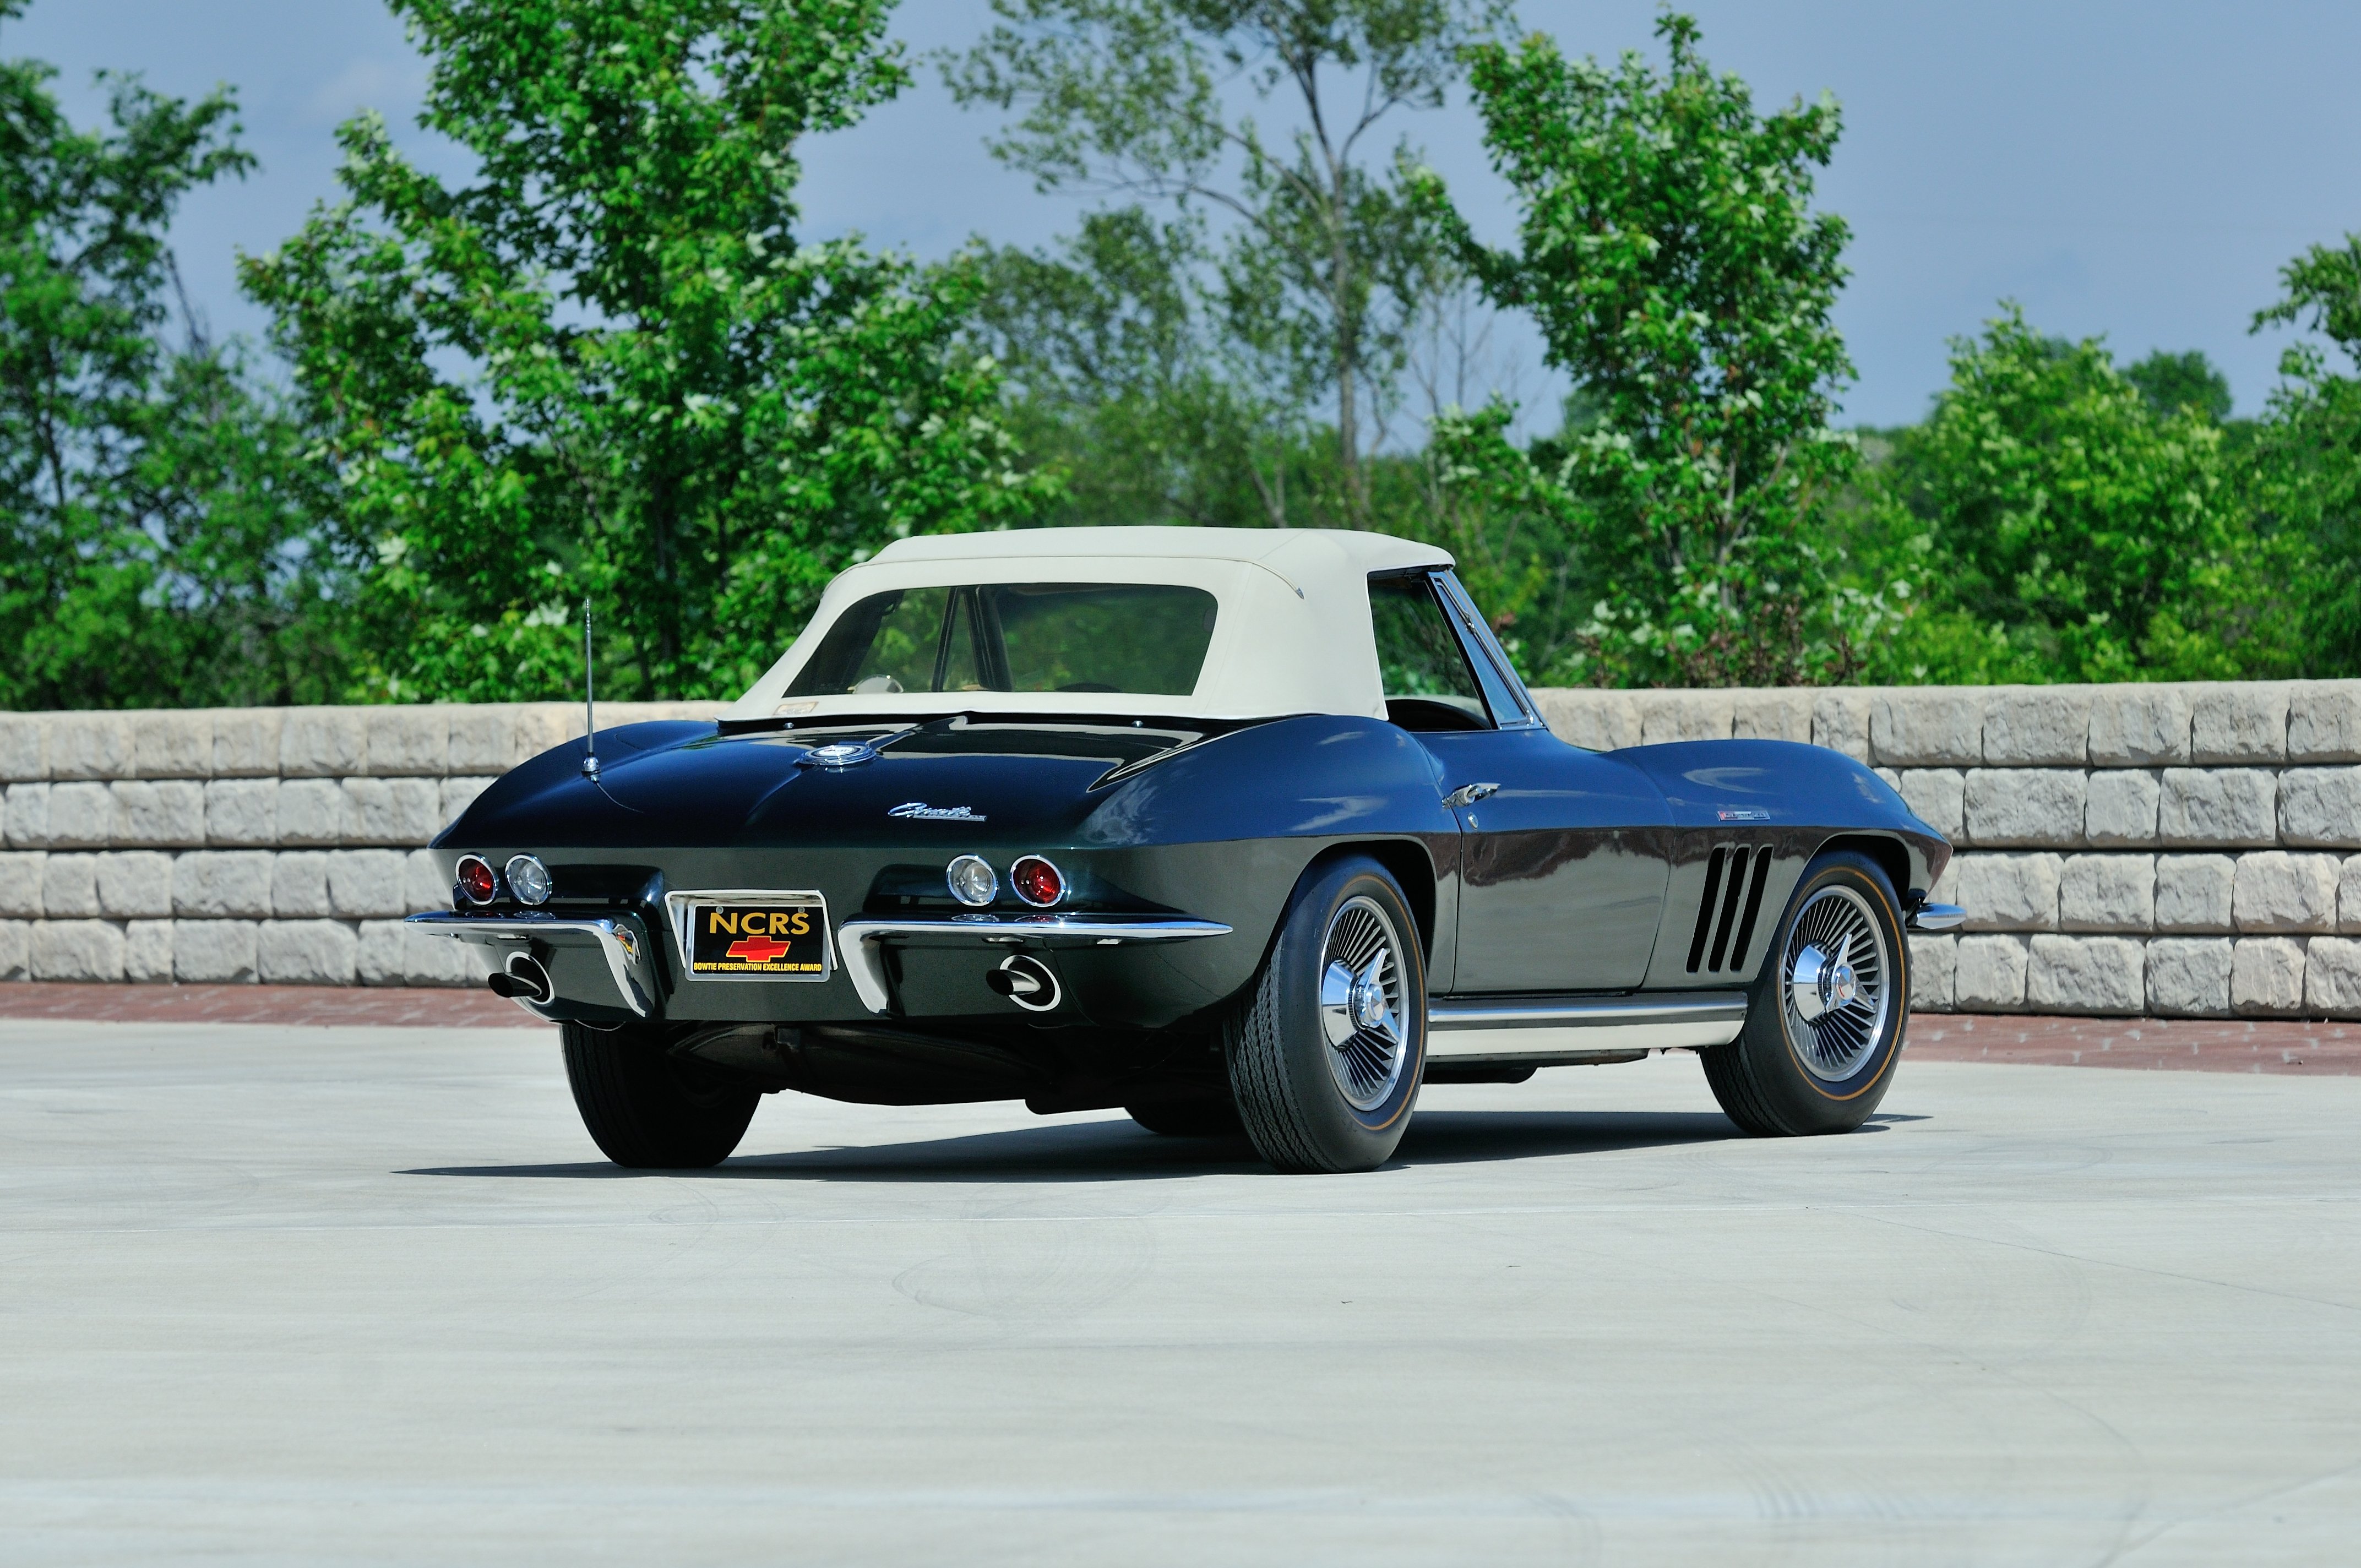 1965, Chevrolet, Corvette, Stingray, Ating, Ray, Muscle, Convertible, Classic, Old, Original, Usa,  03 Wallpaper